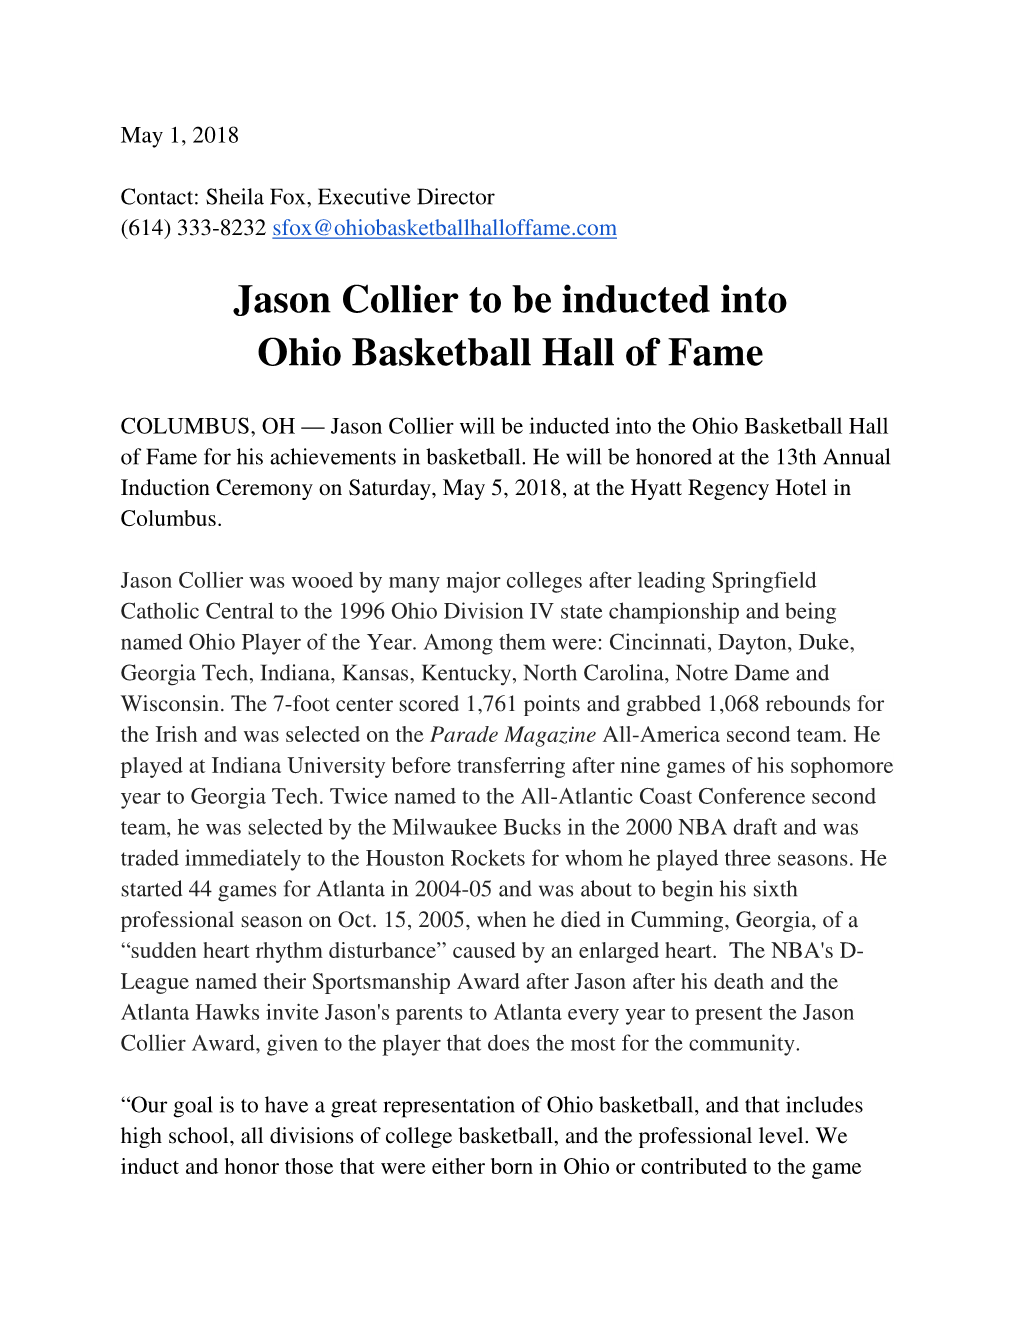 Jason Collier to Be Inducted Into Ohio Basketball Hall of Fame